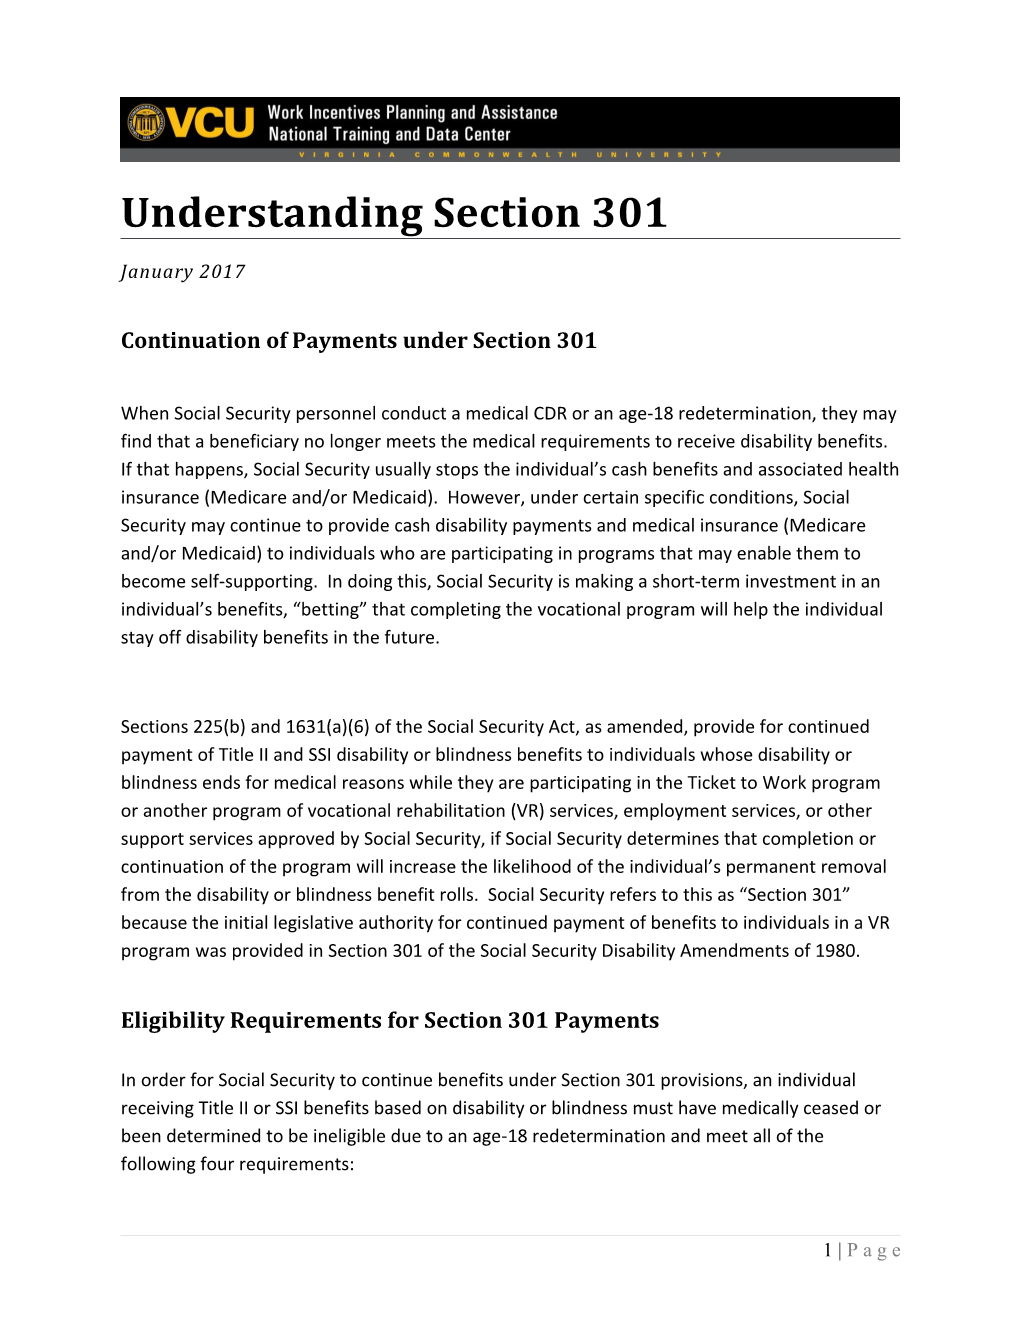 Continuation of Payments Under Section 301